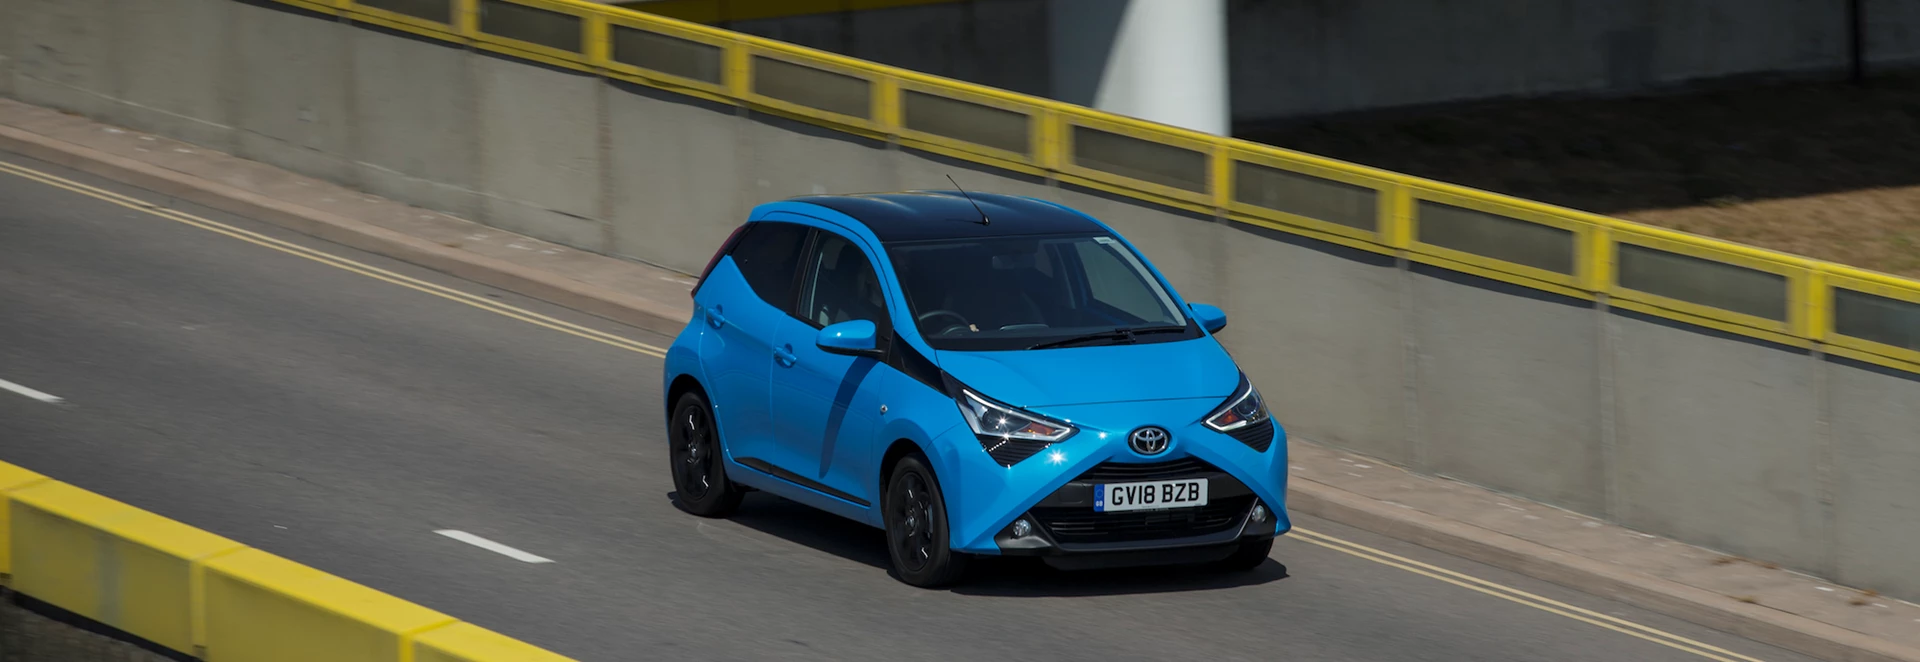 2018 Toyota Aygo review